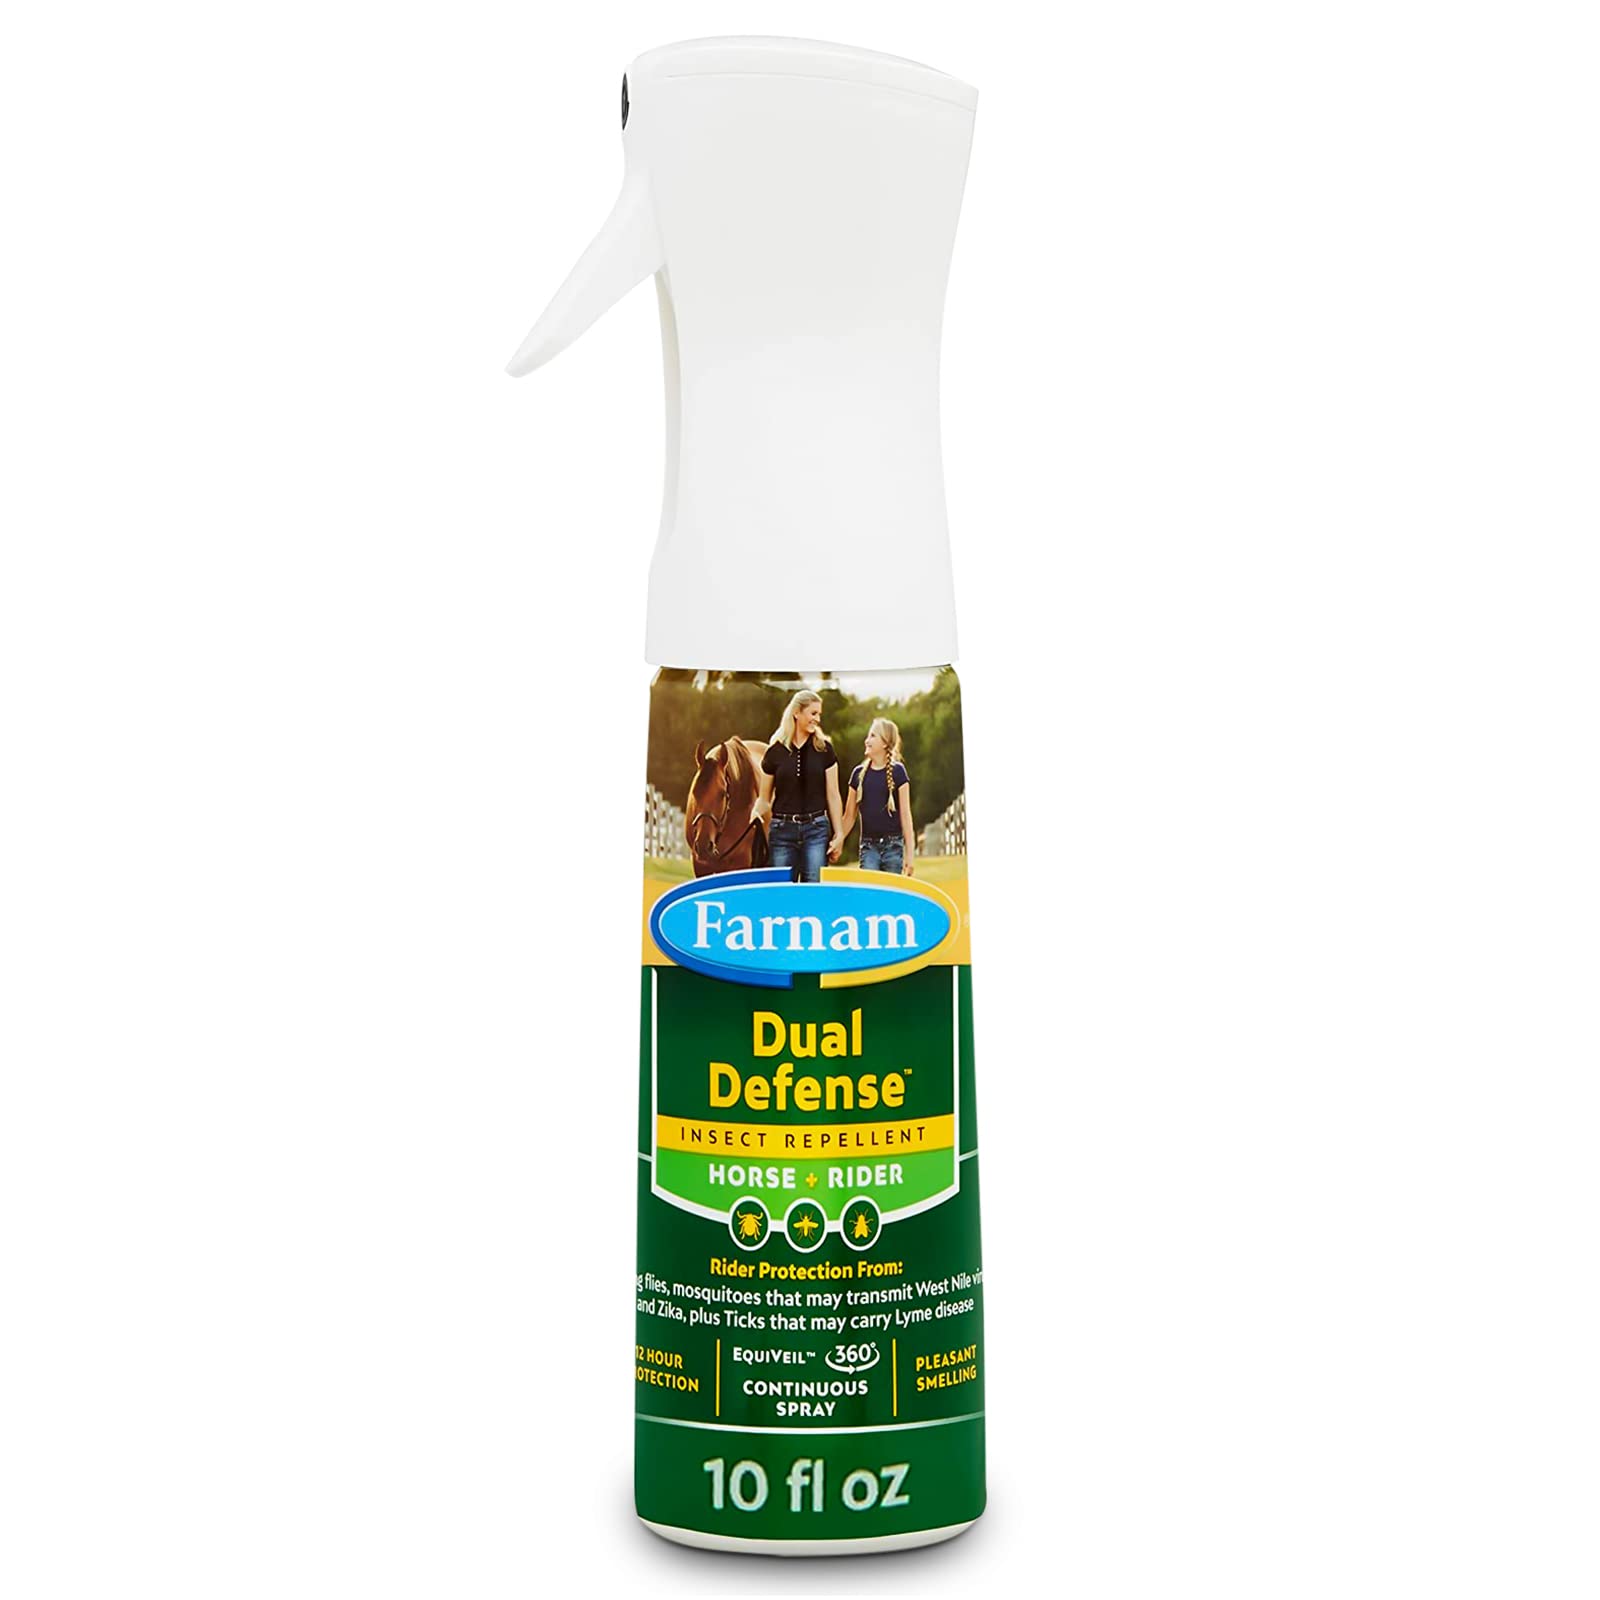 Farnam Dual Defense Insect Repellent-12 Hour Fly Protection for Horses- Long Lasting Mosquito Protection- Effective Fly Control for Horses-Available with Premium Quality Centaurus AZ Gloves-10oz